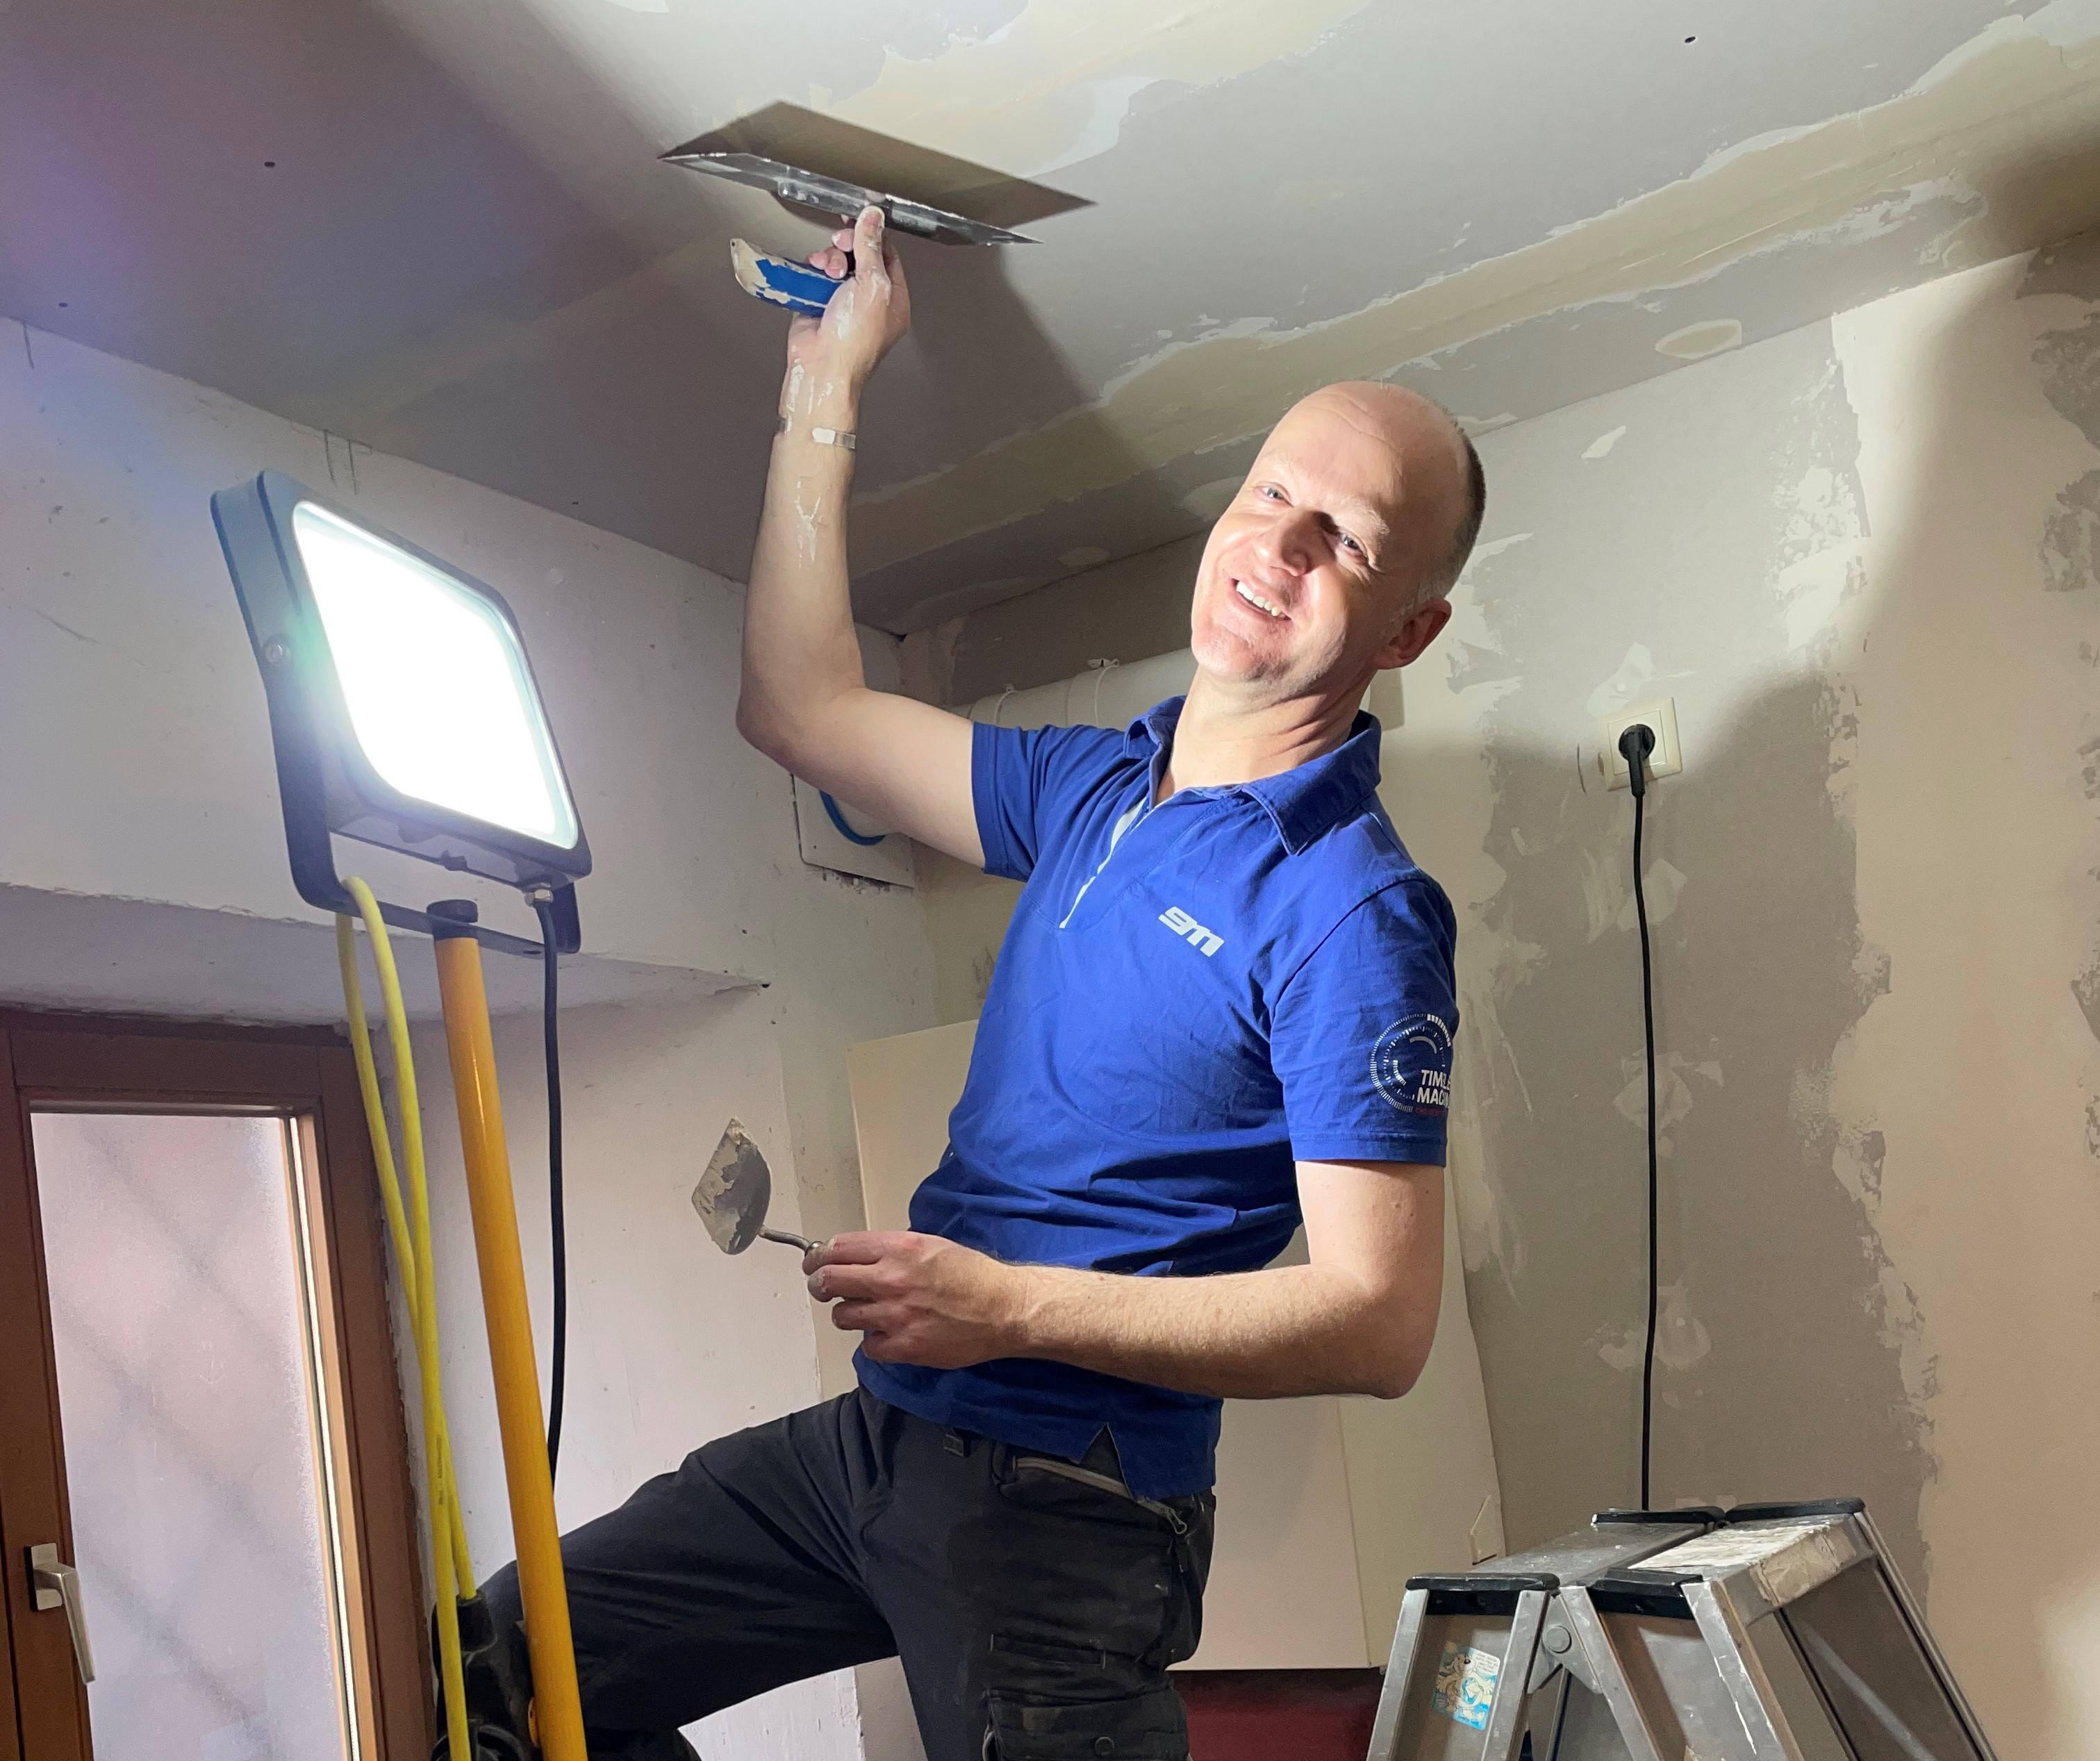 The boss lends a hand: Röhm Managing Director Dr. Till Scharf filled walls and ceilings himself.